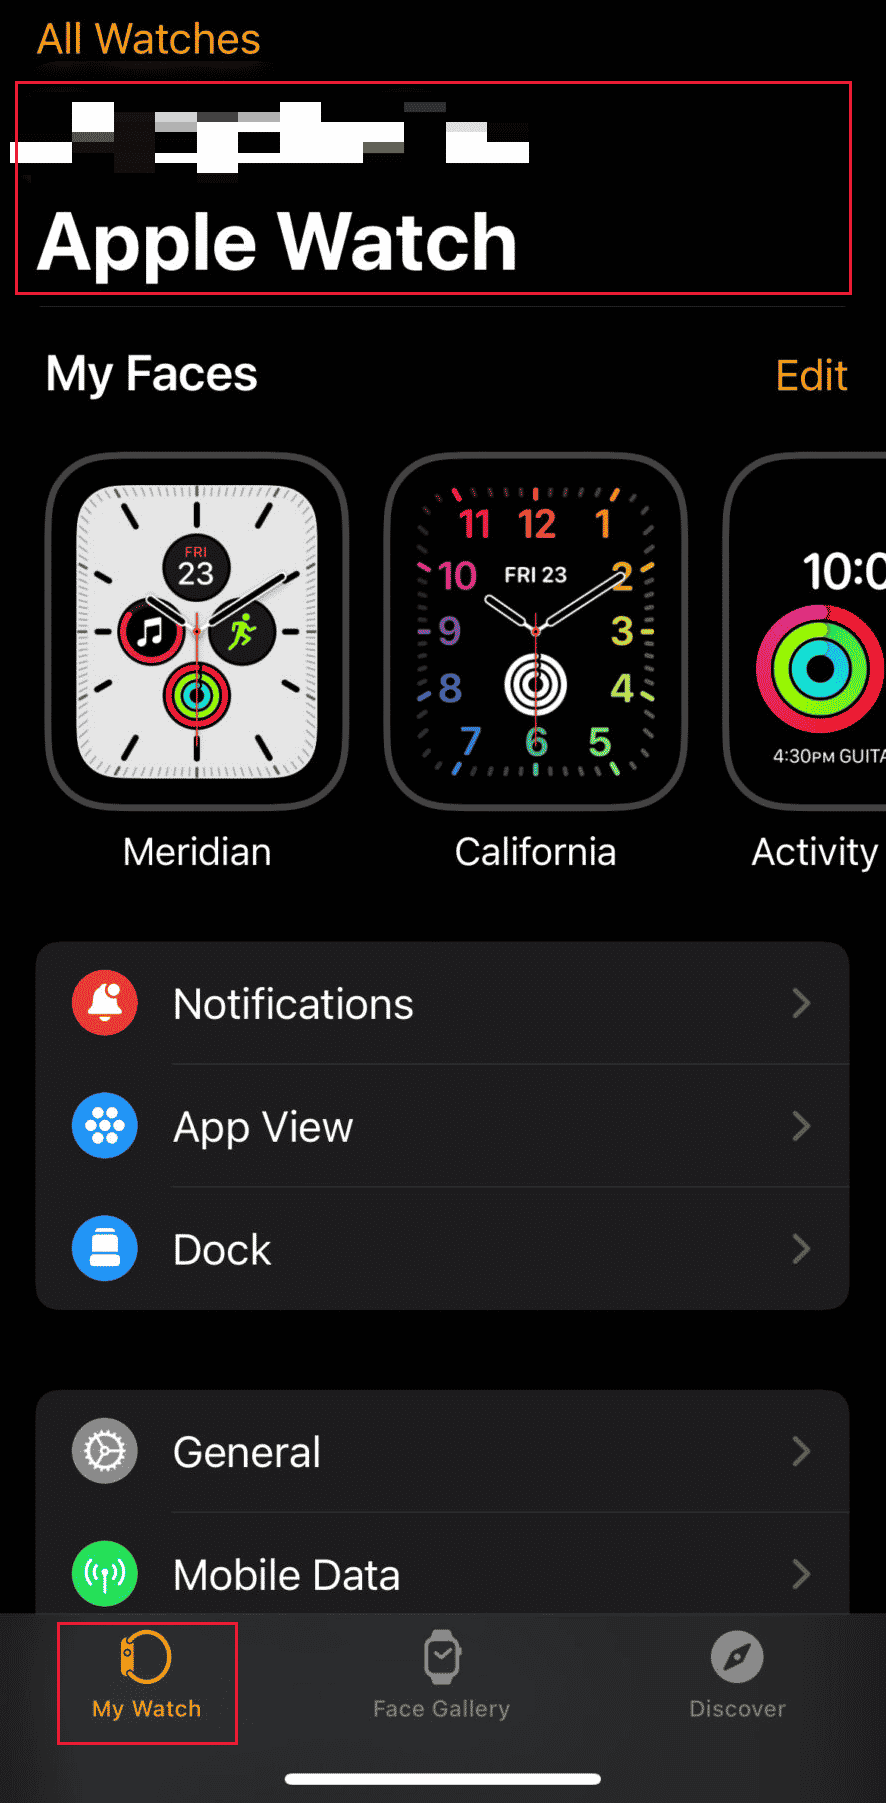 My Watch tab - tap on your Apple Watch